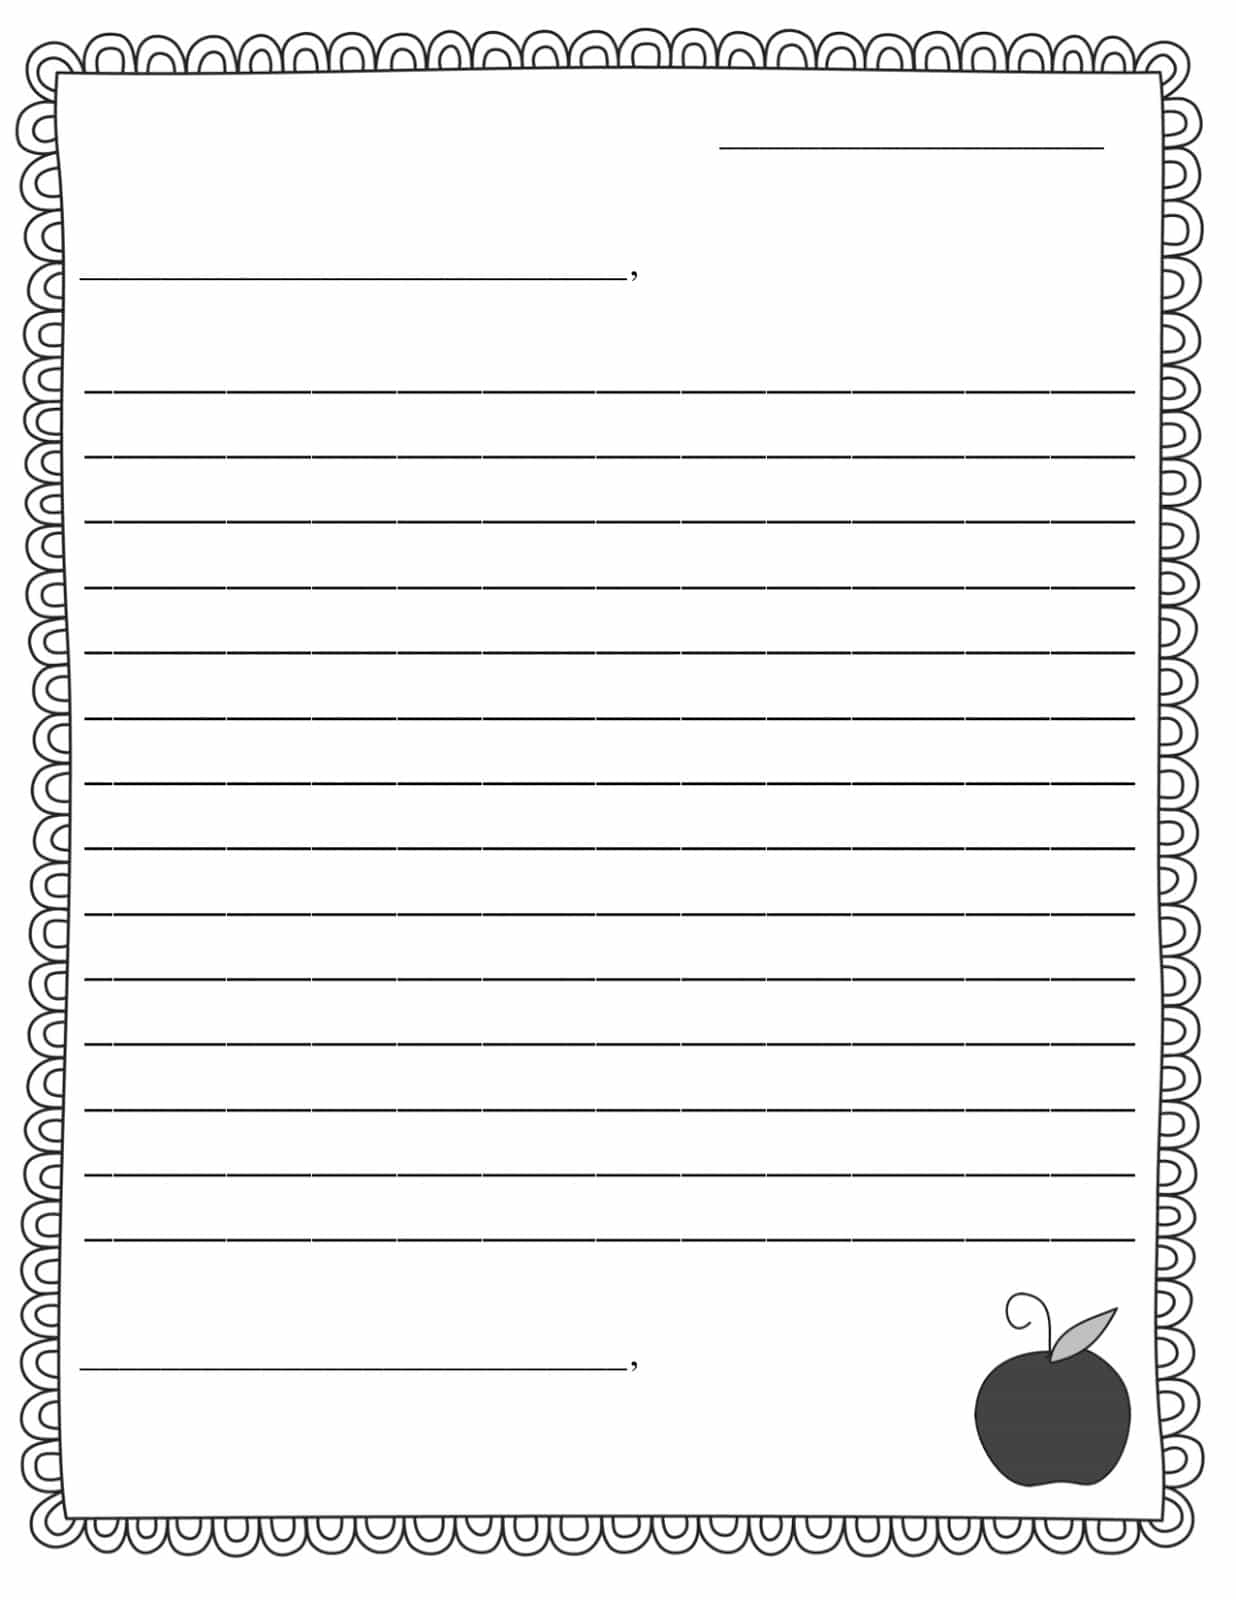 Letter Writing Worksheets For Grade 5 And Alphabet Tracing Worksheets For 3 Year Olds